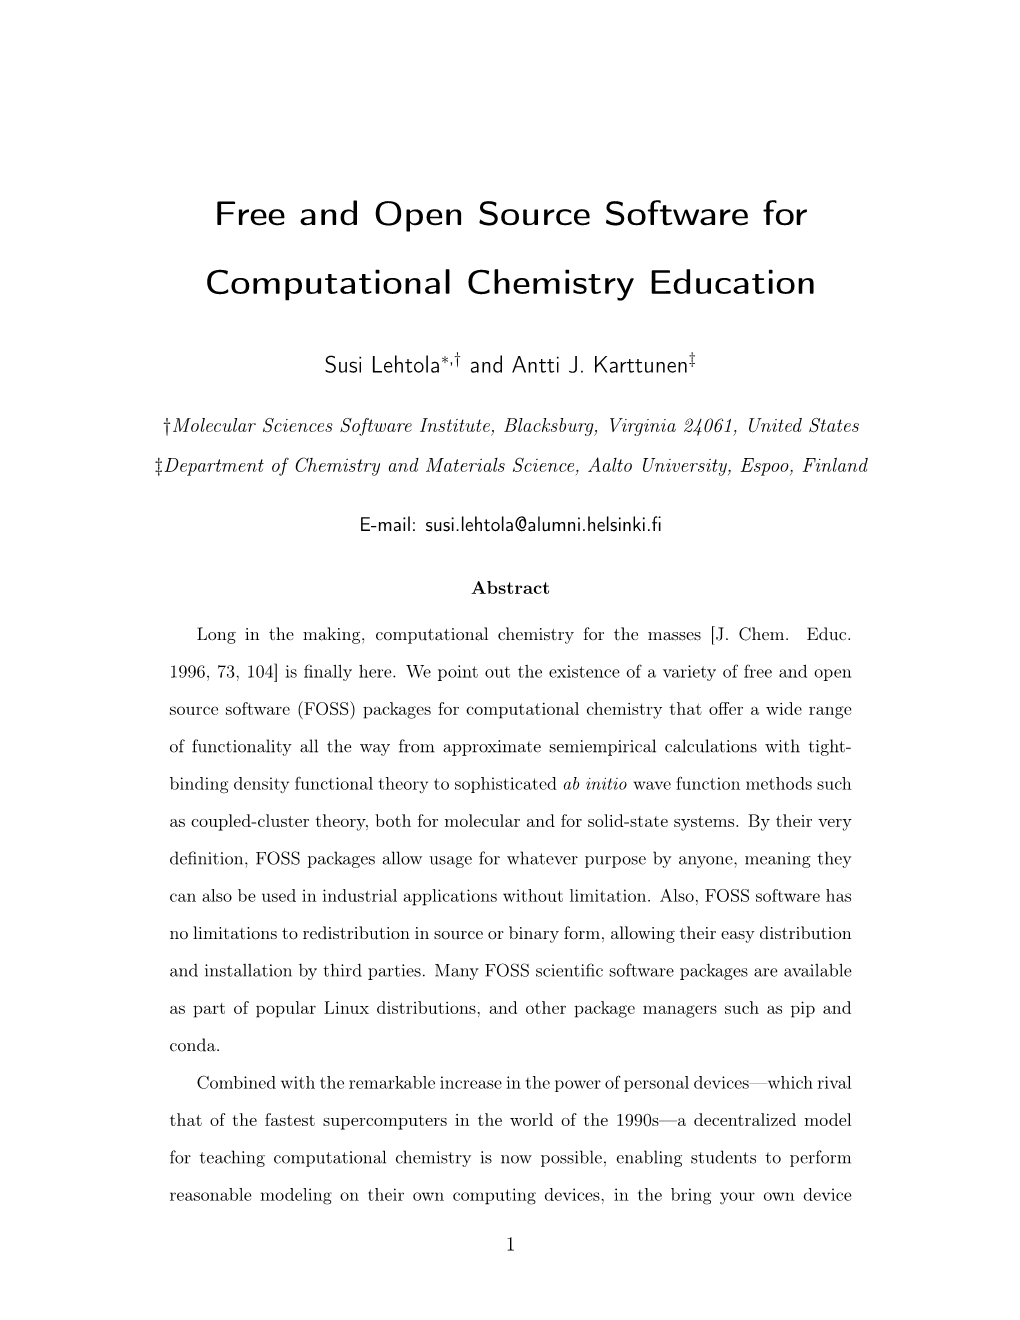 Free and Open Source Software for Computational Chemistry Education